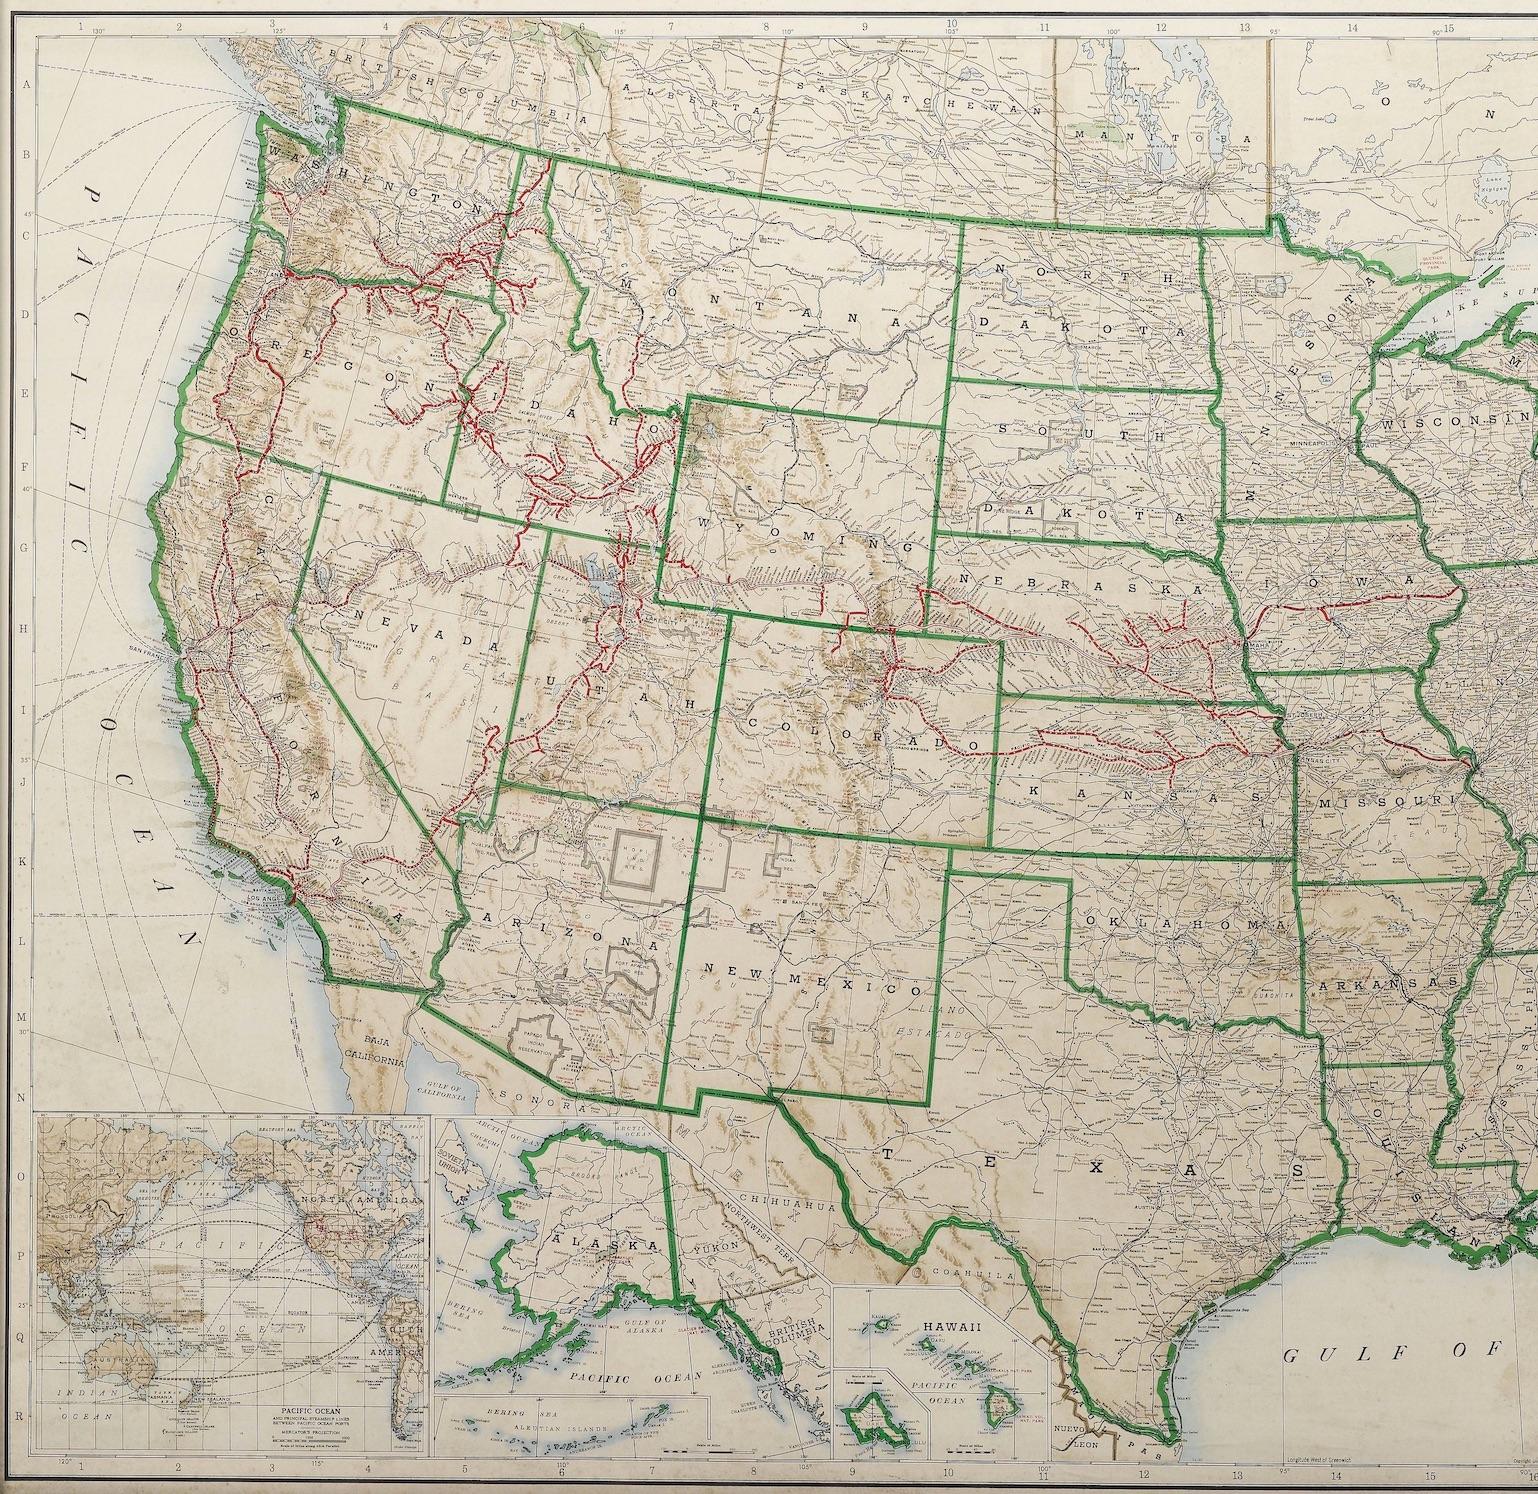 This large map of the United States was issued by Rand McNally and Company on behalf of the Union Pacific Railroad. The map embraces the whole of the United States, illustrating the routes of the Union Pacific Railroad and its many subsidiaries.